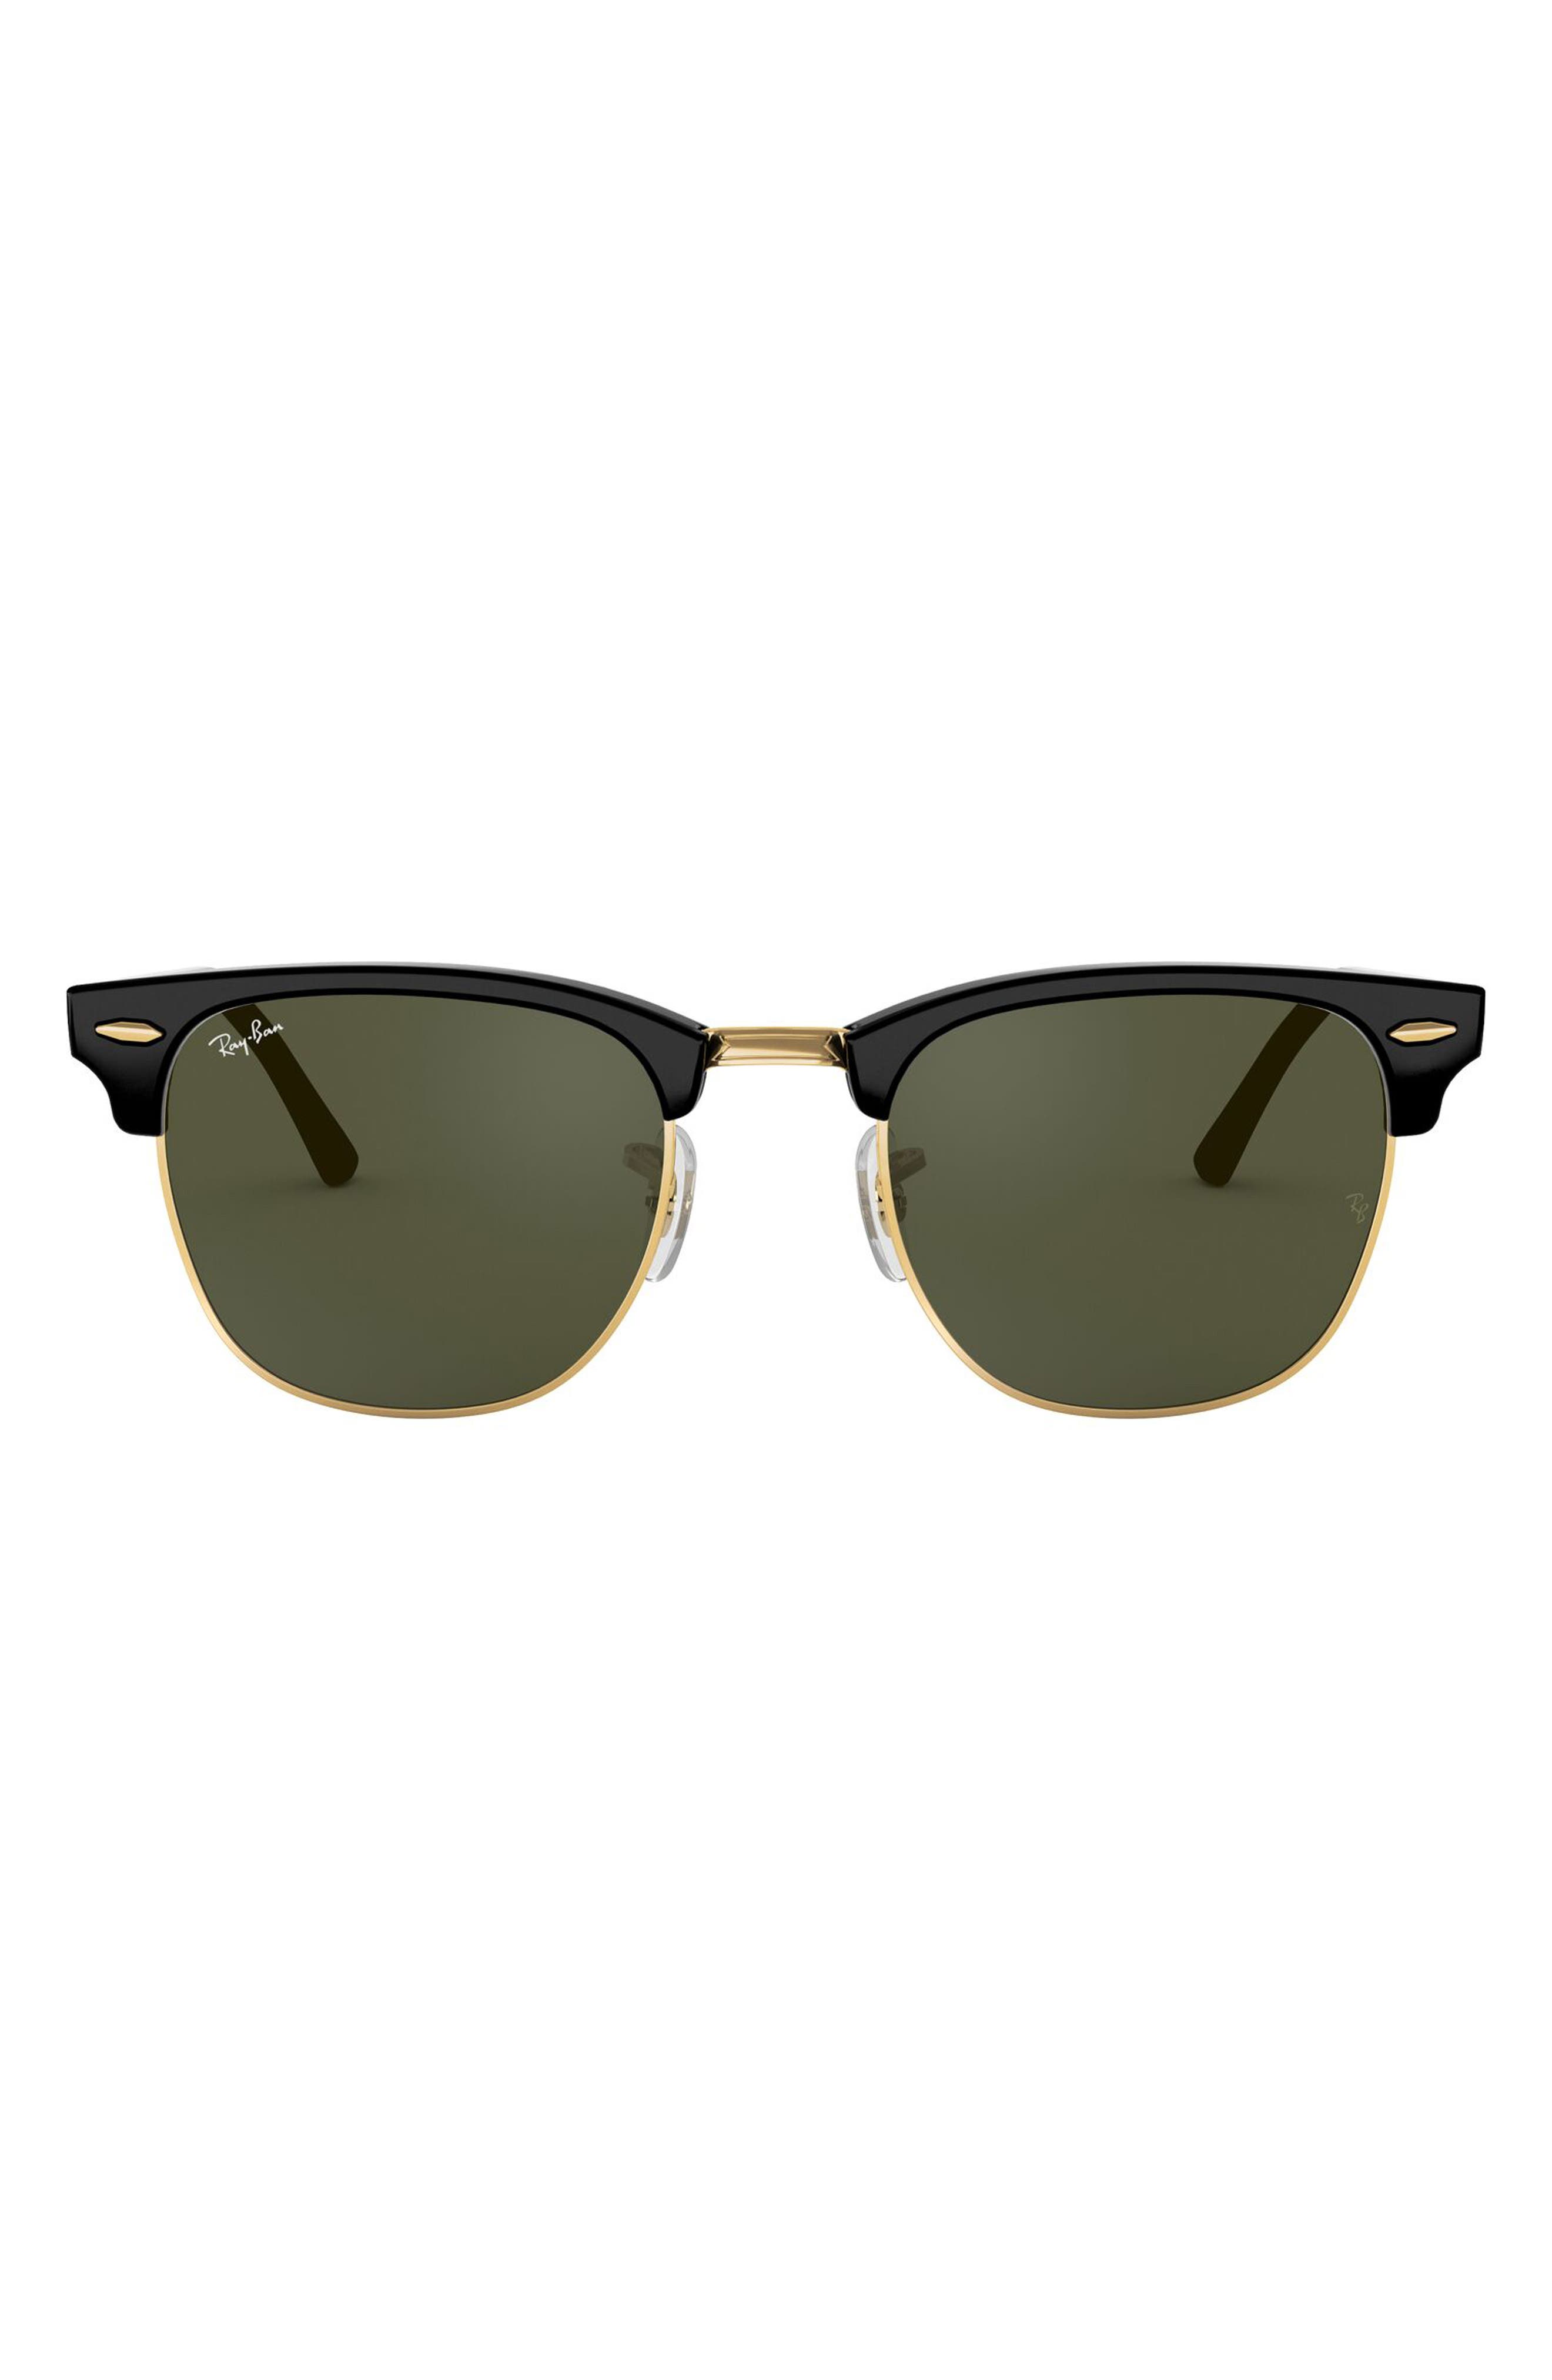 cooling glass ray ban black